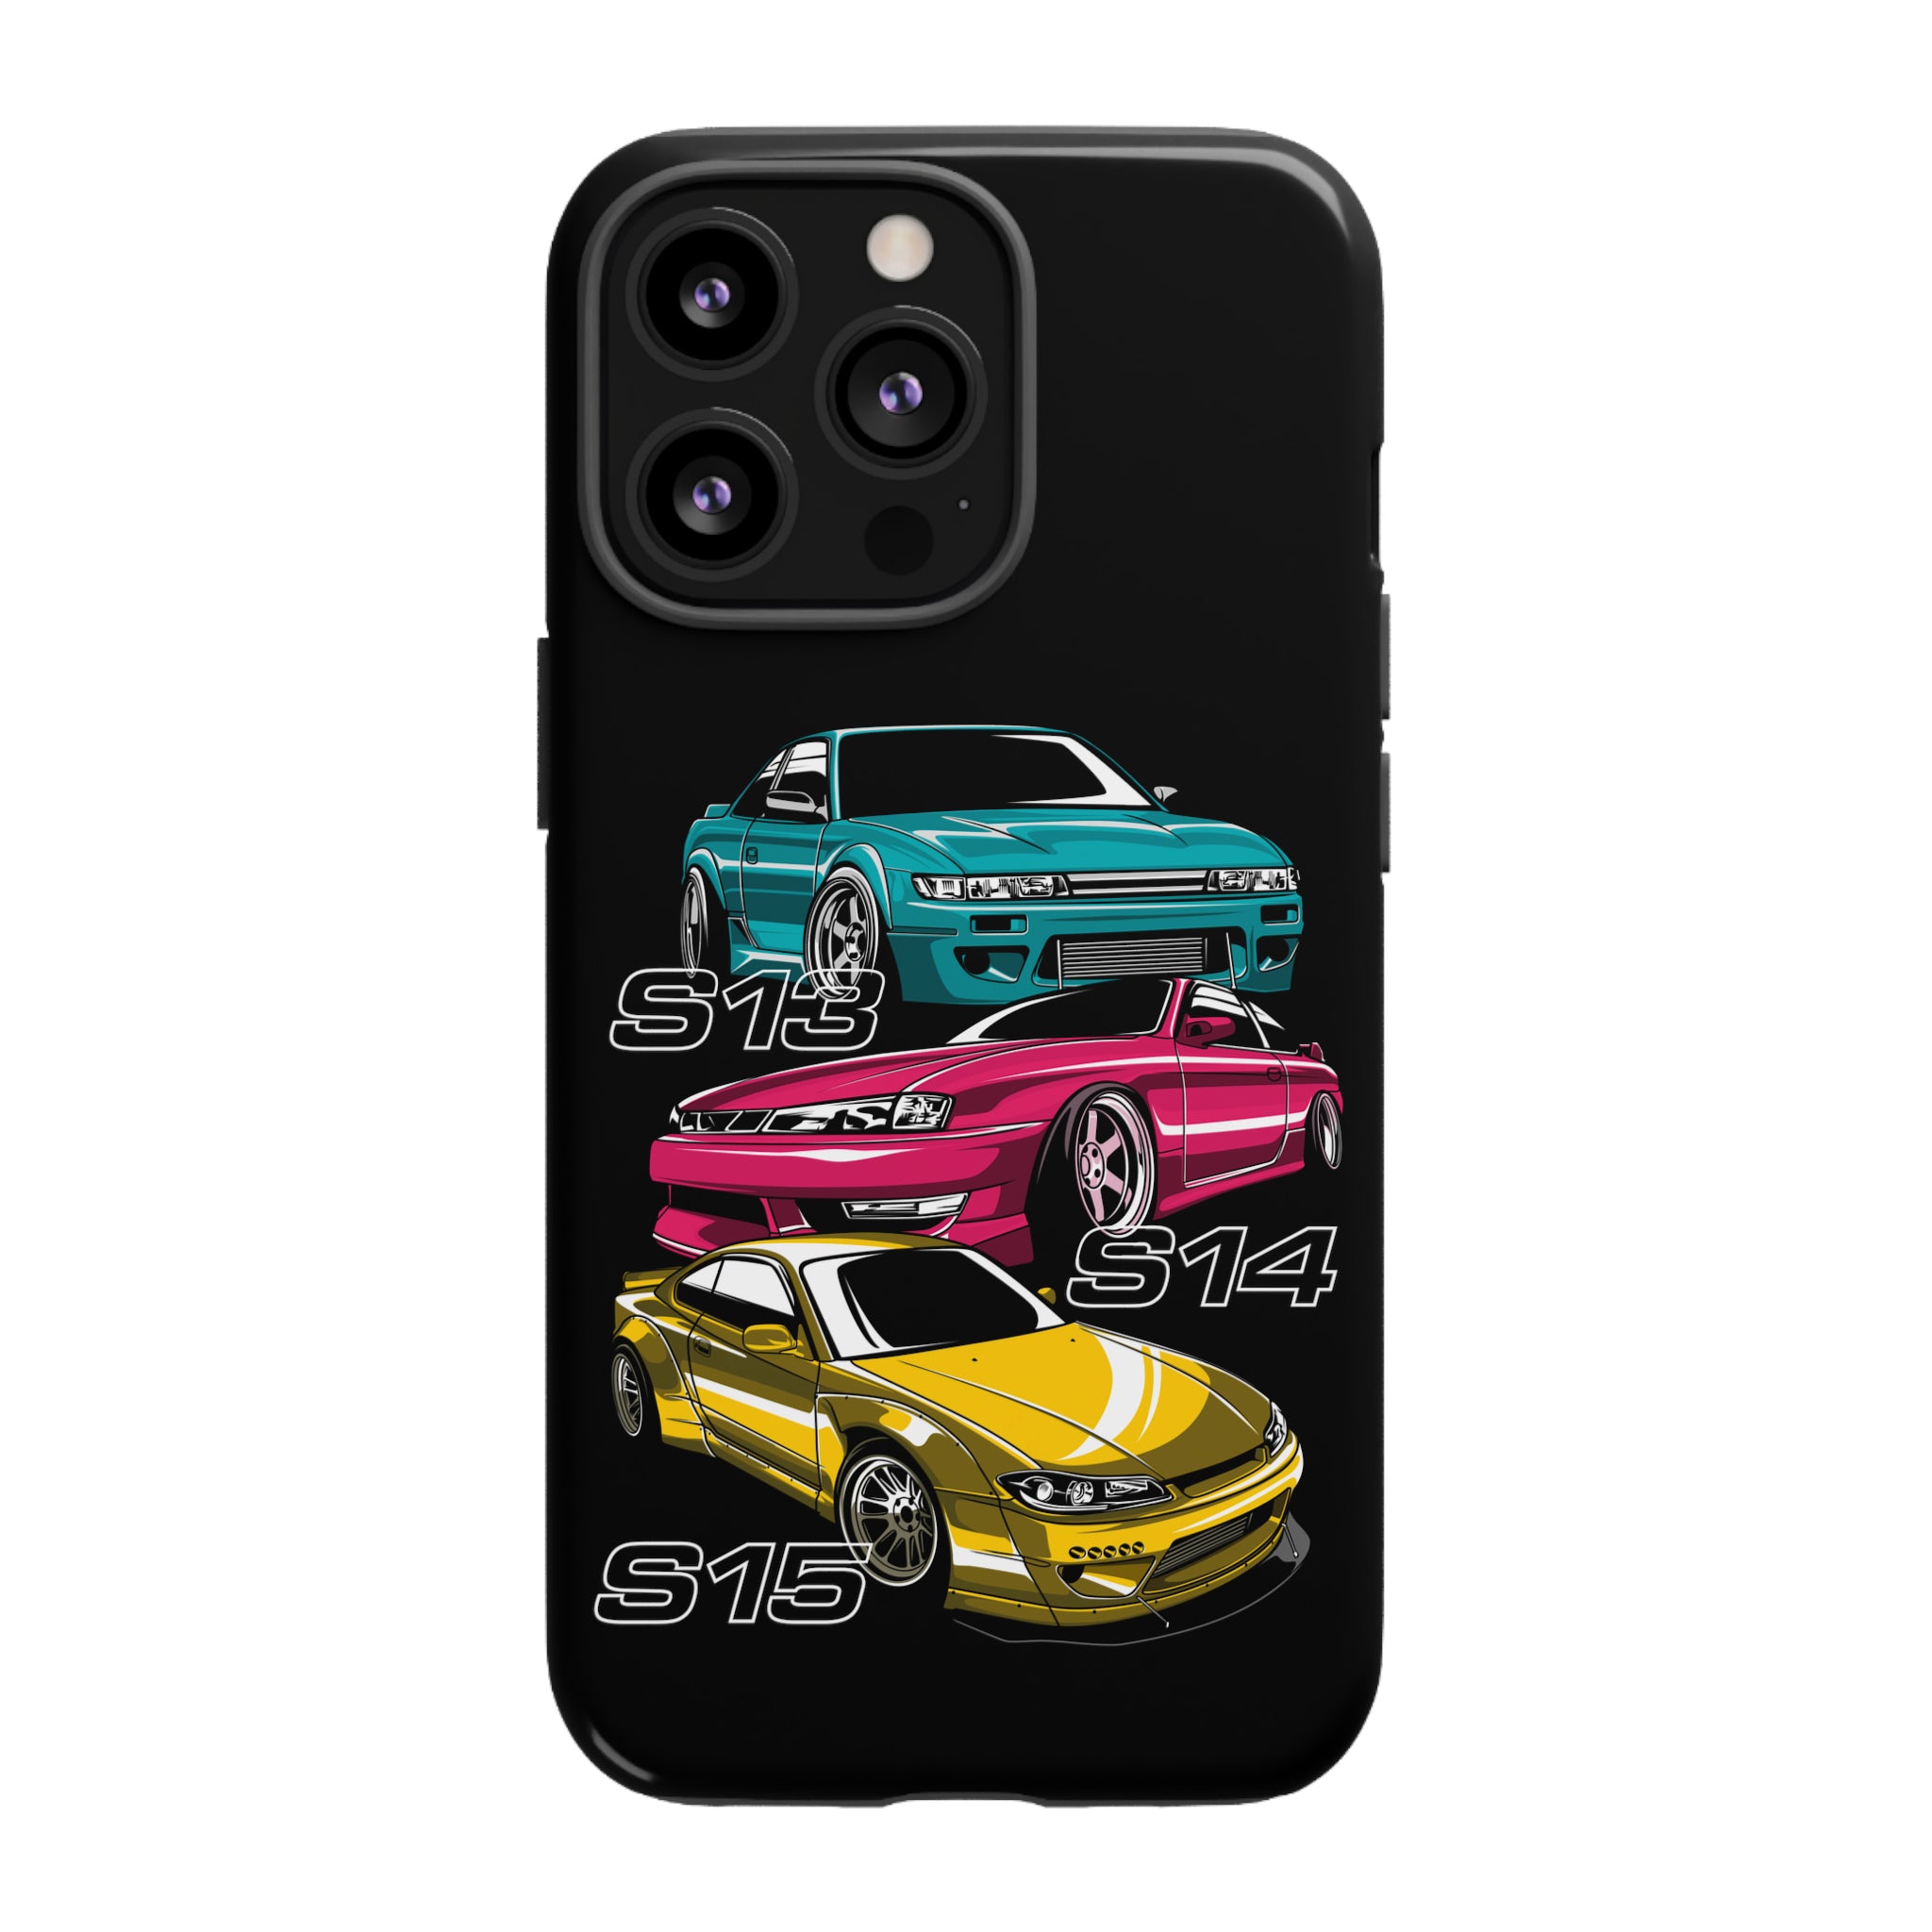 S Chassis Generation - Phone Case